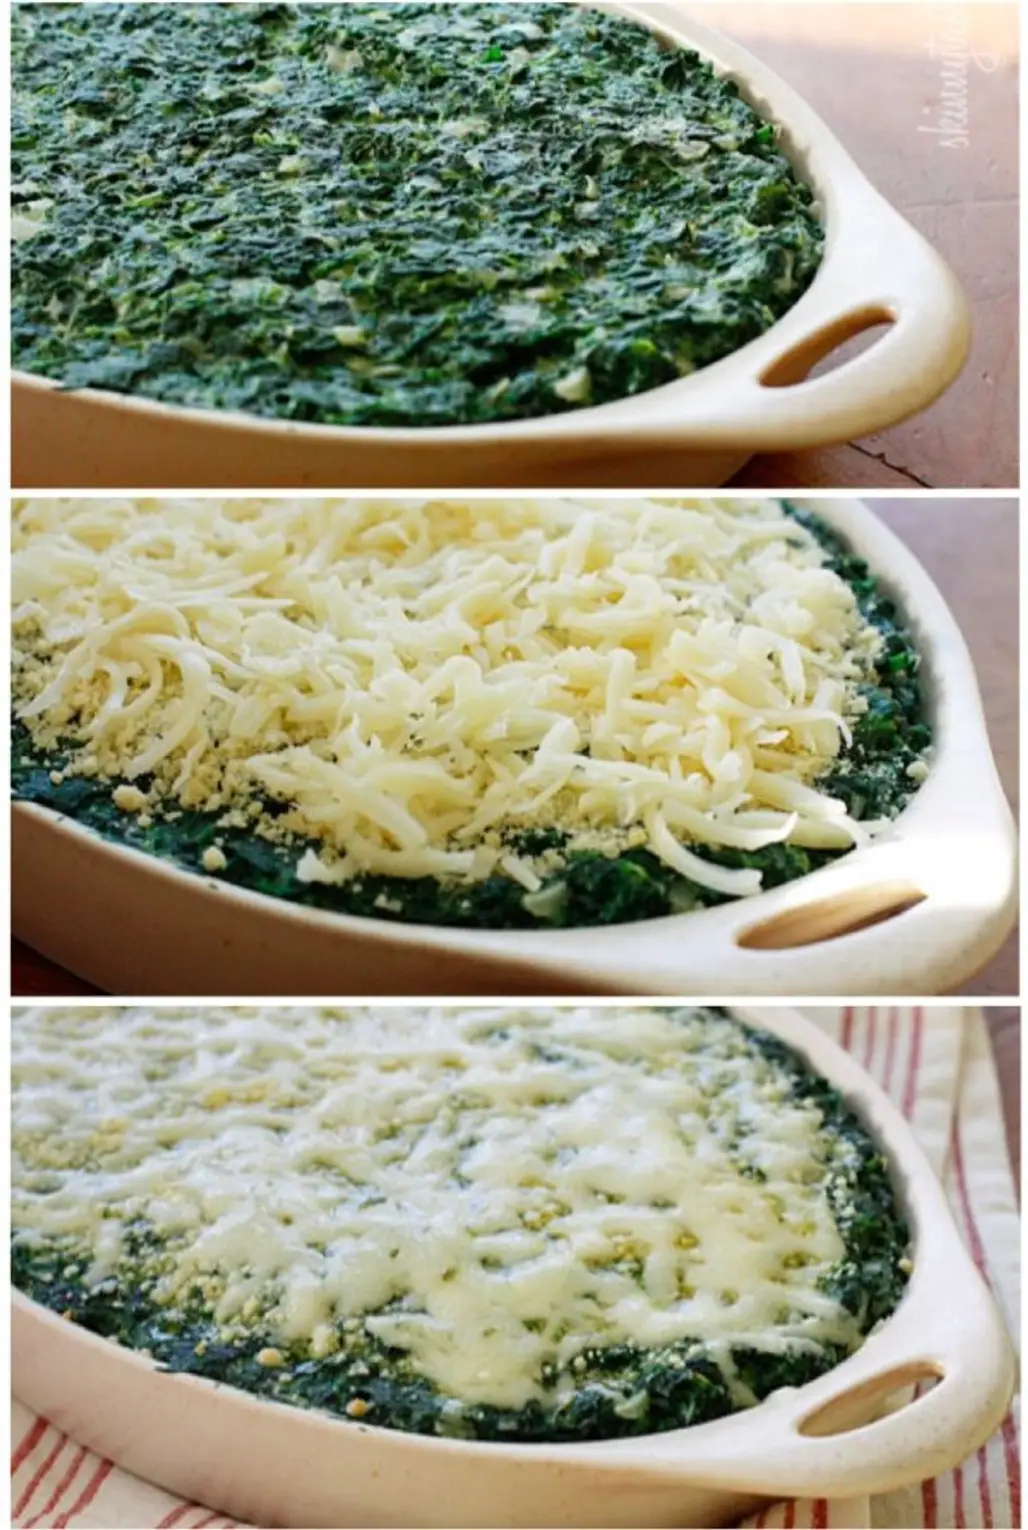 Spinach with Melted Cheese